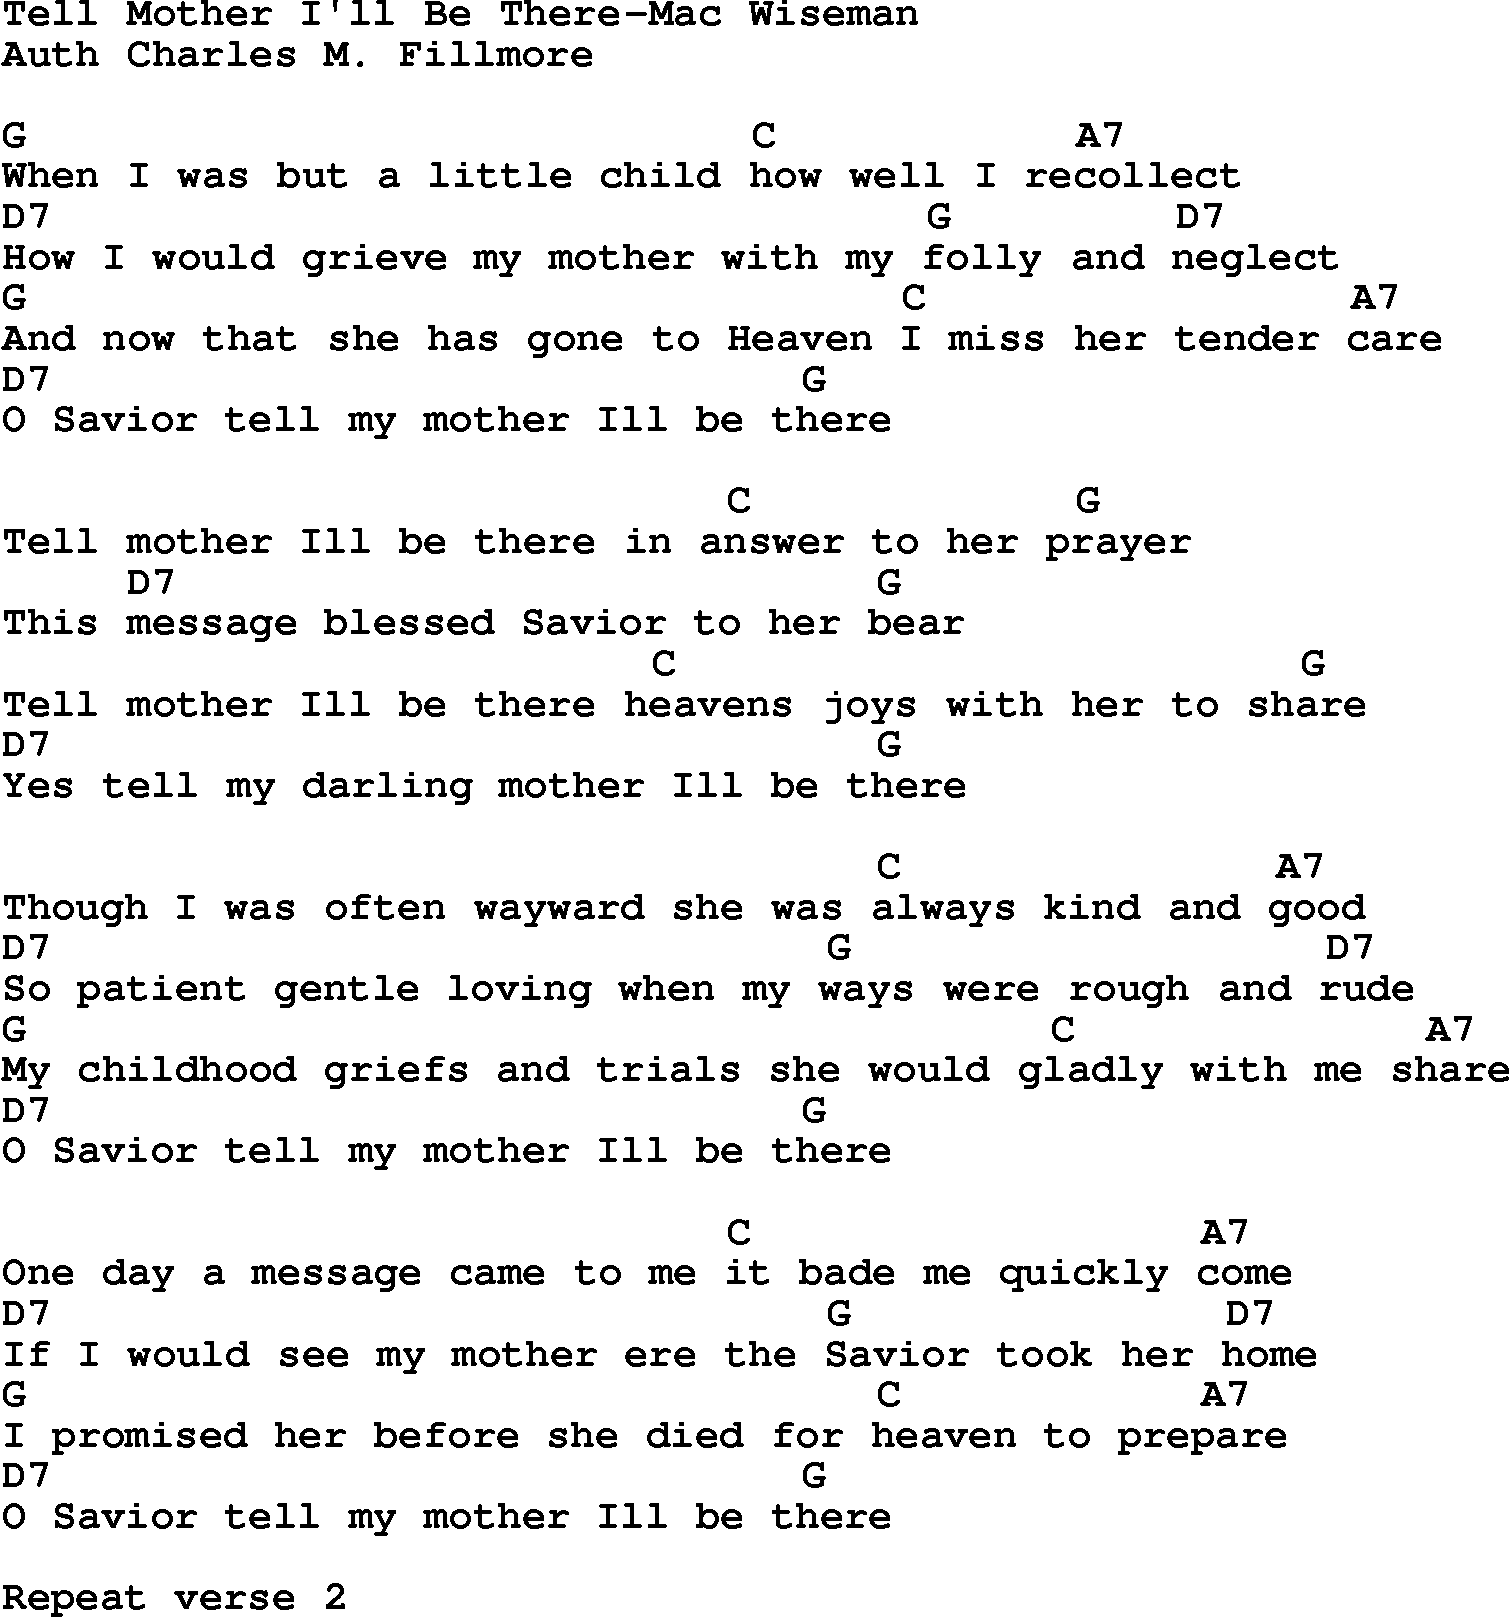 Country, Southern and Bluegrass Gospel Song Tell Mother I'll Be There-Mac Wiseman lyrics and chords